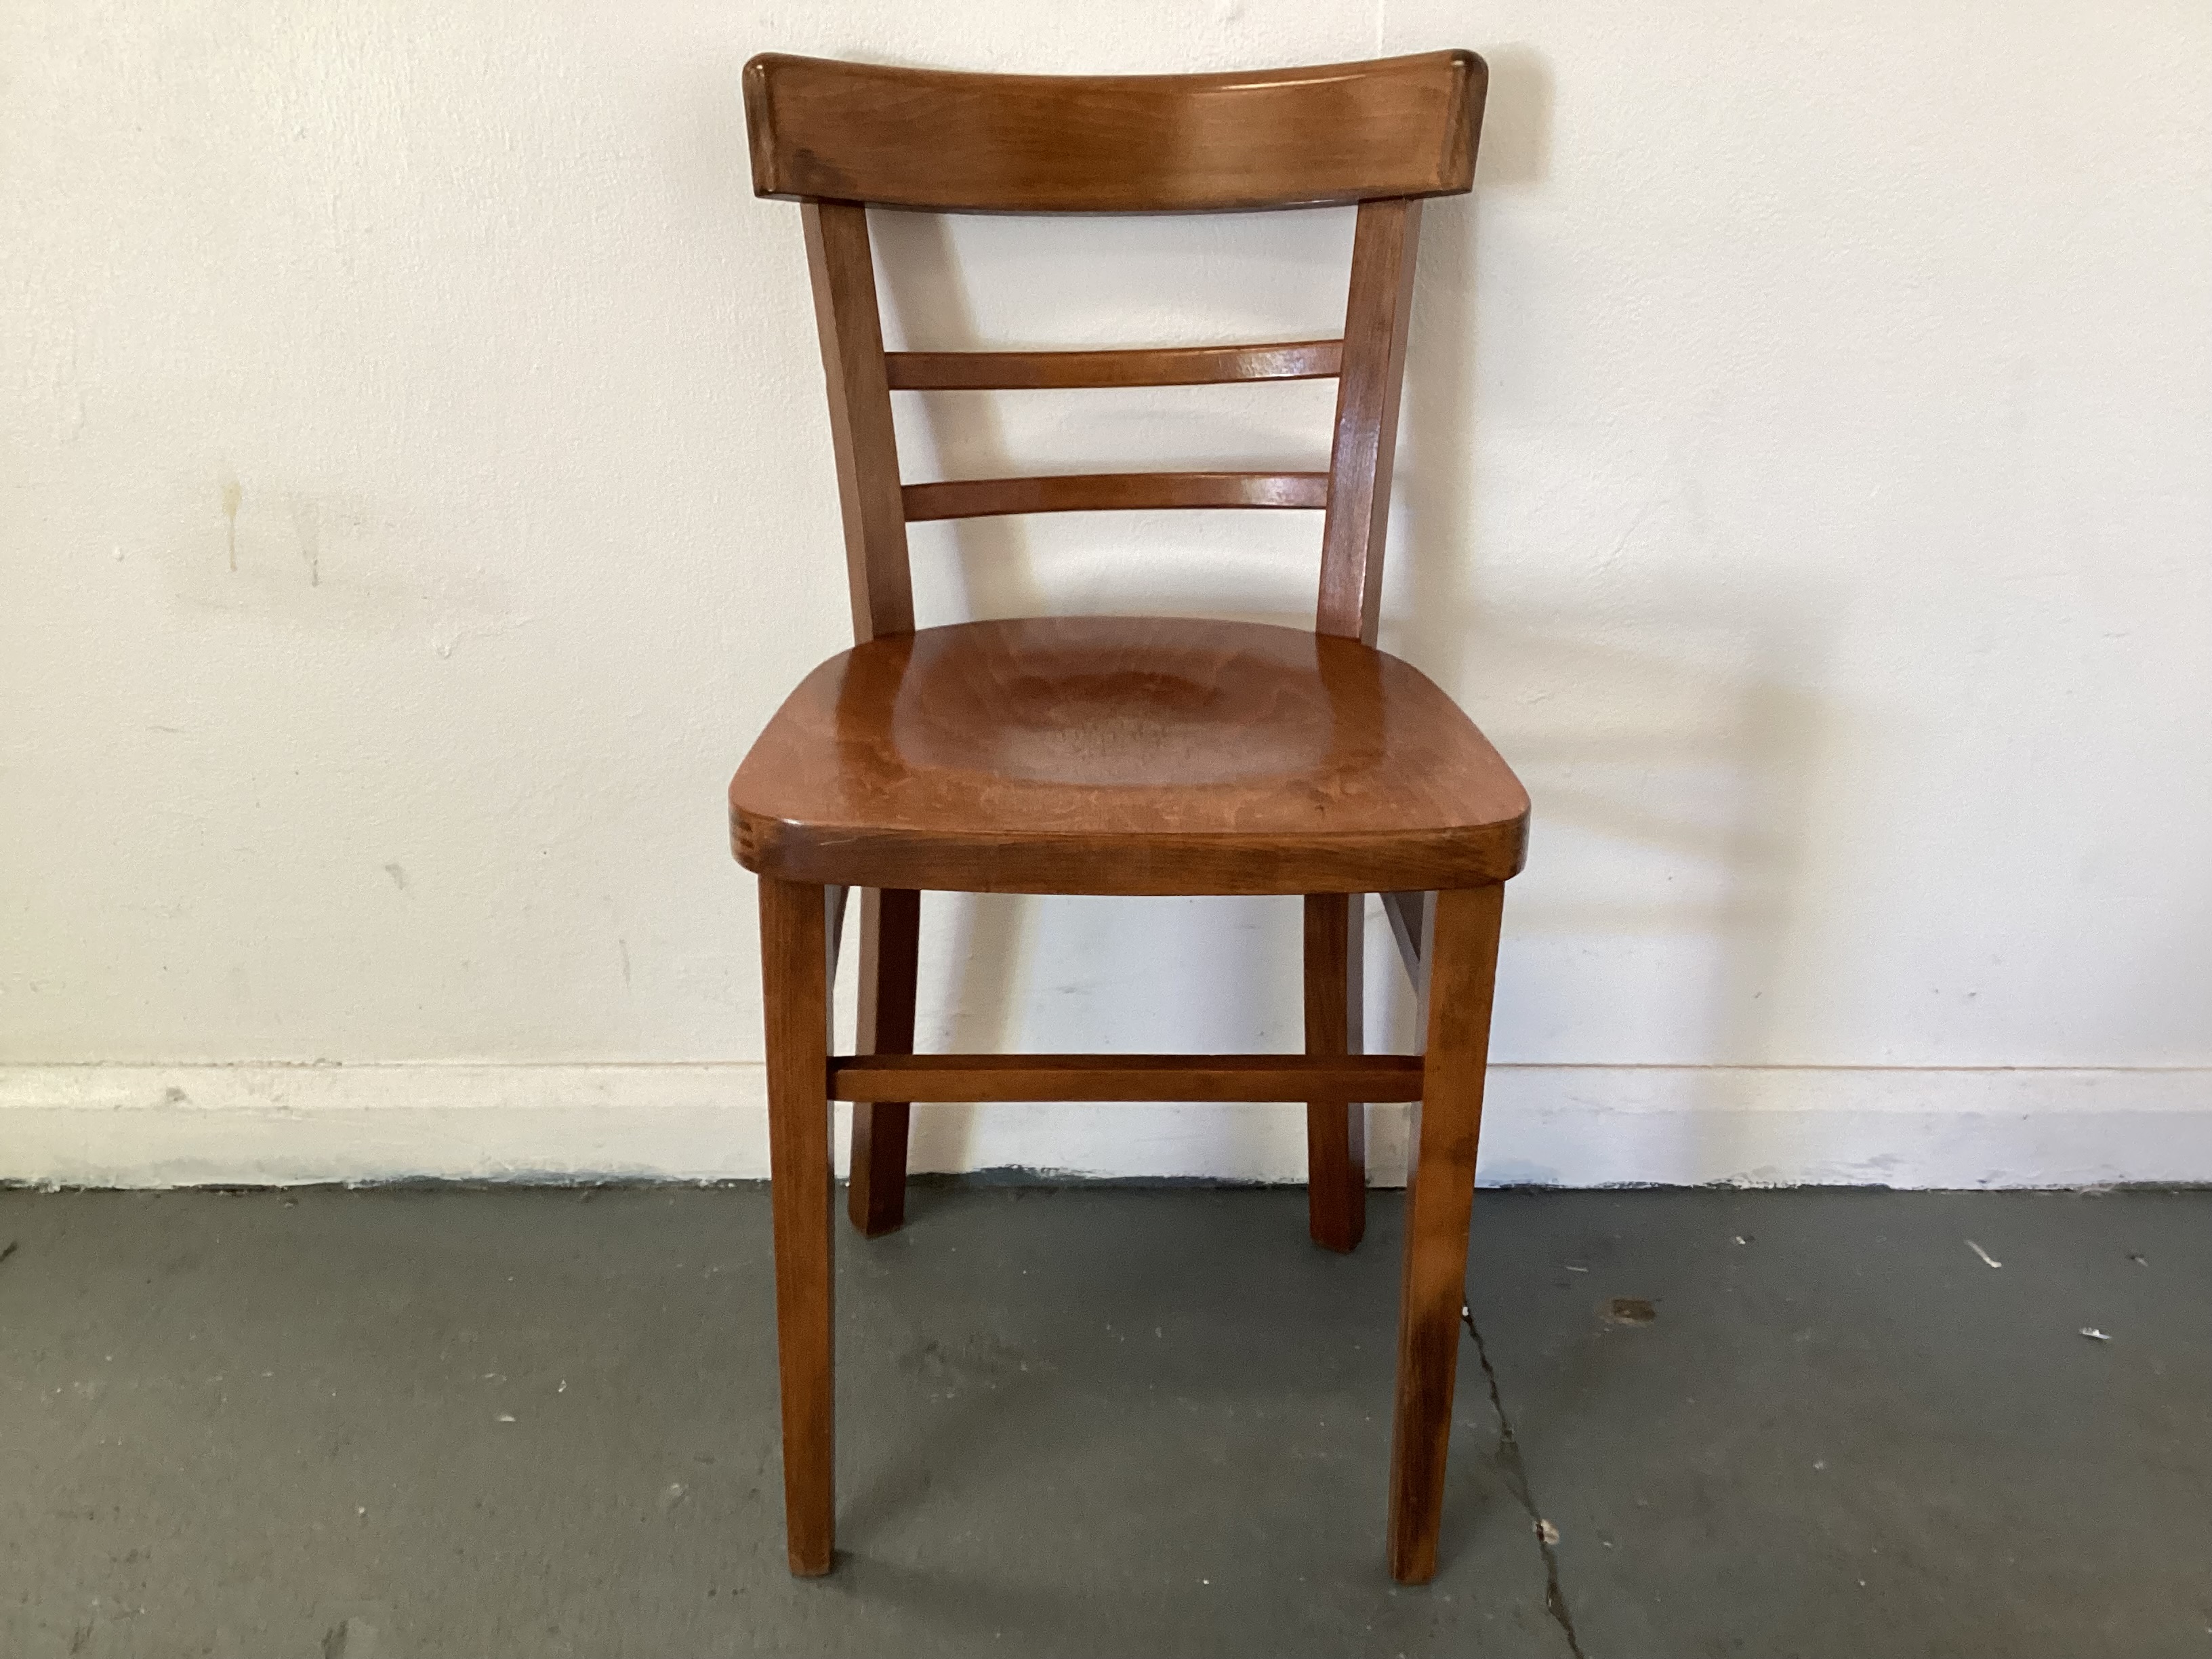    Wooden Dining Chair